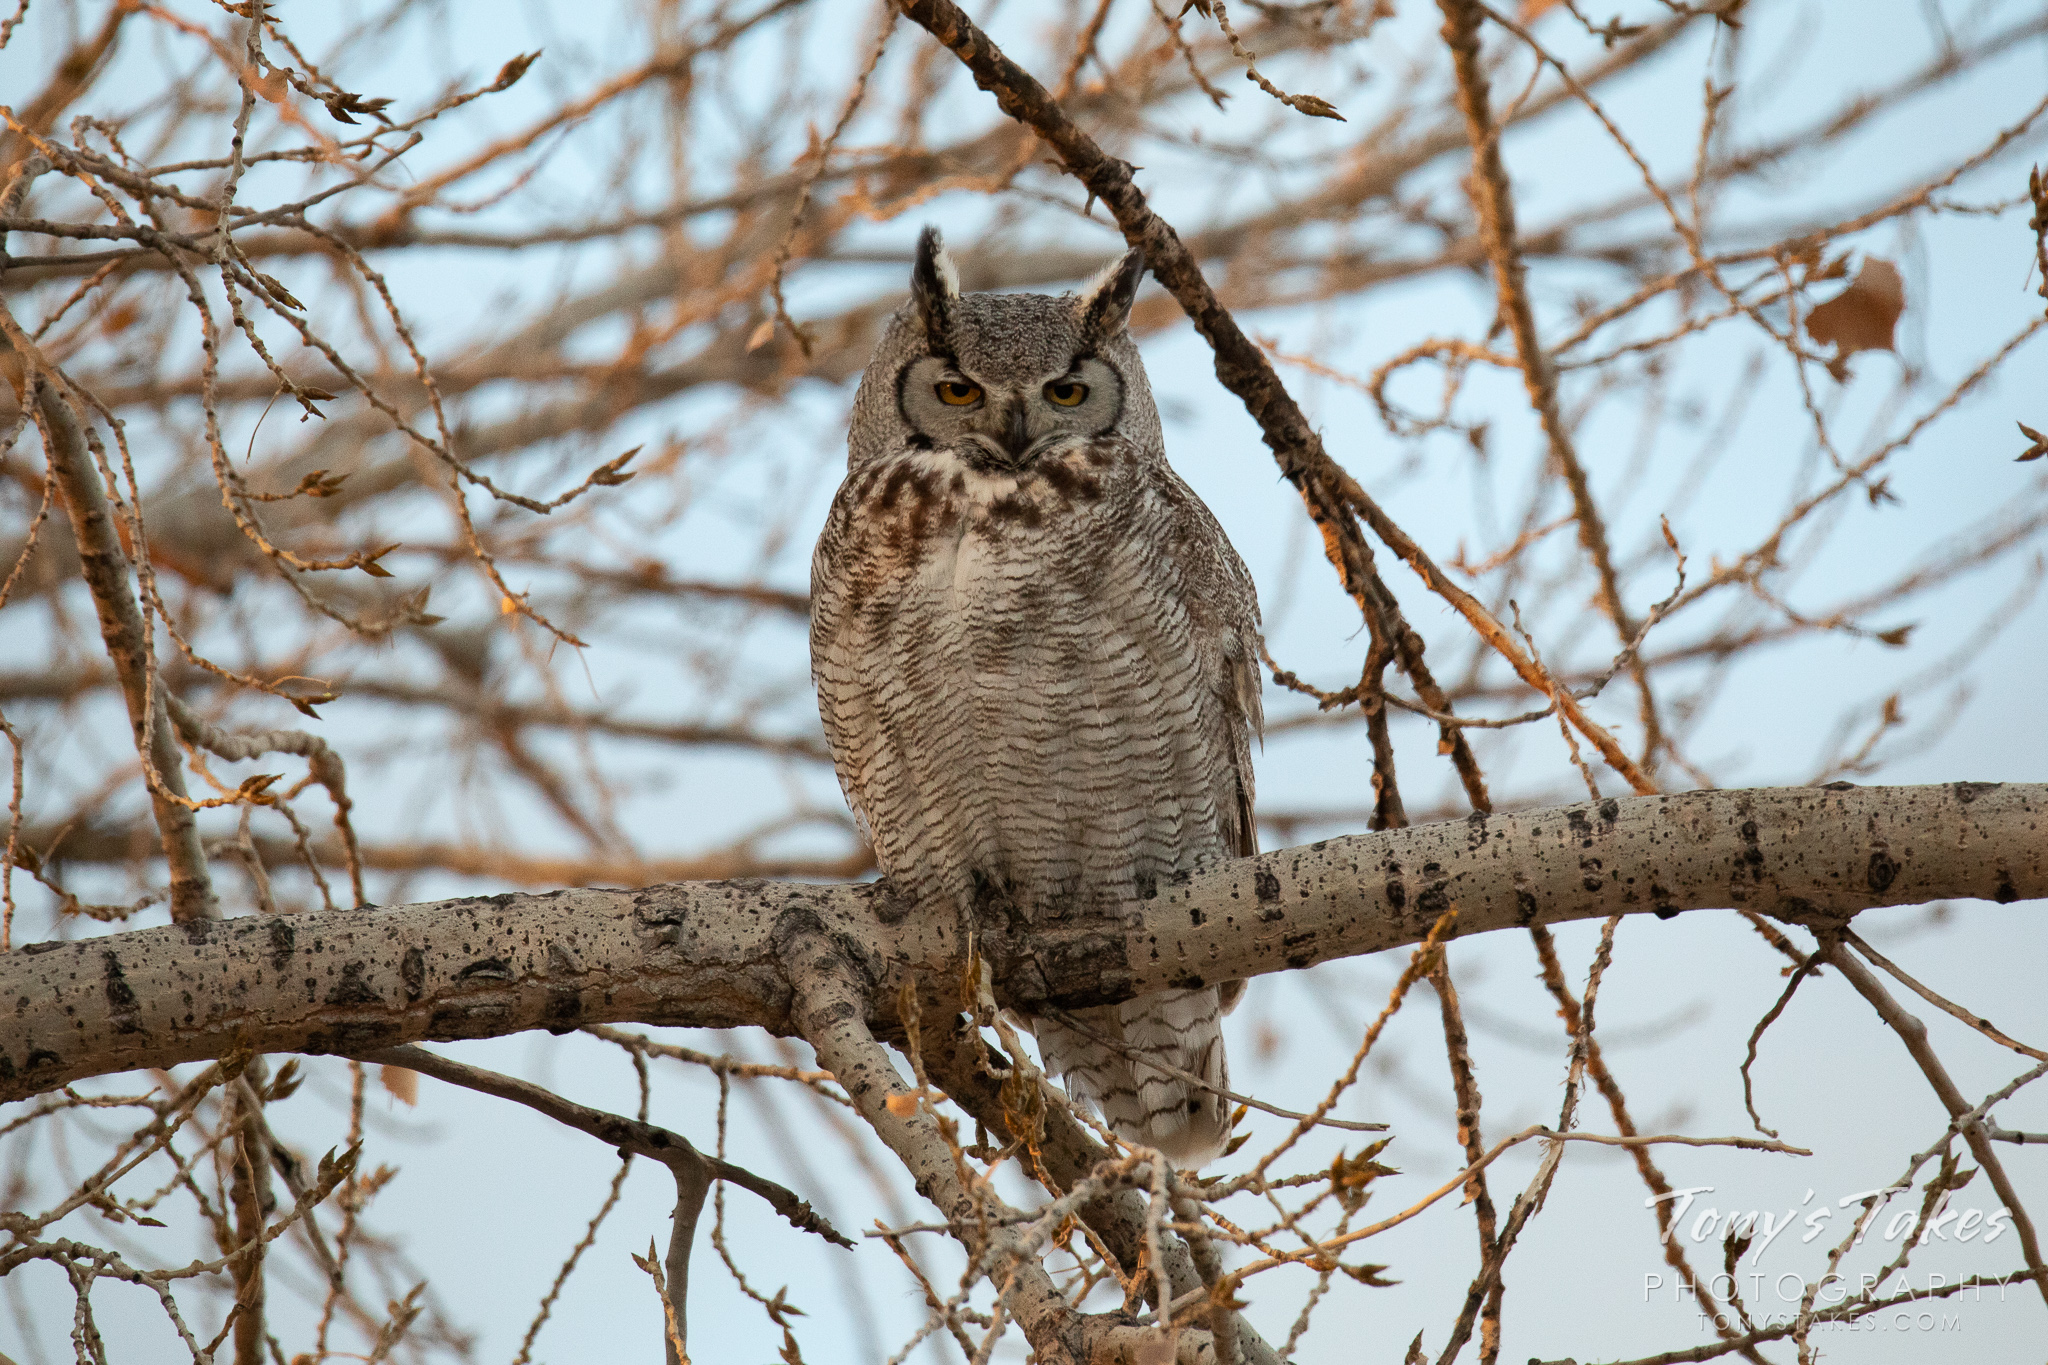 Watchful great horned owl in the early morning light